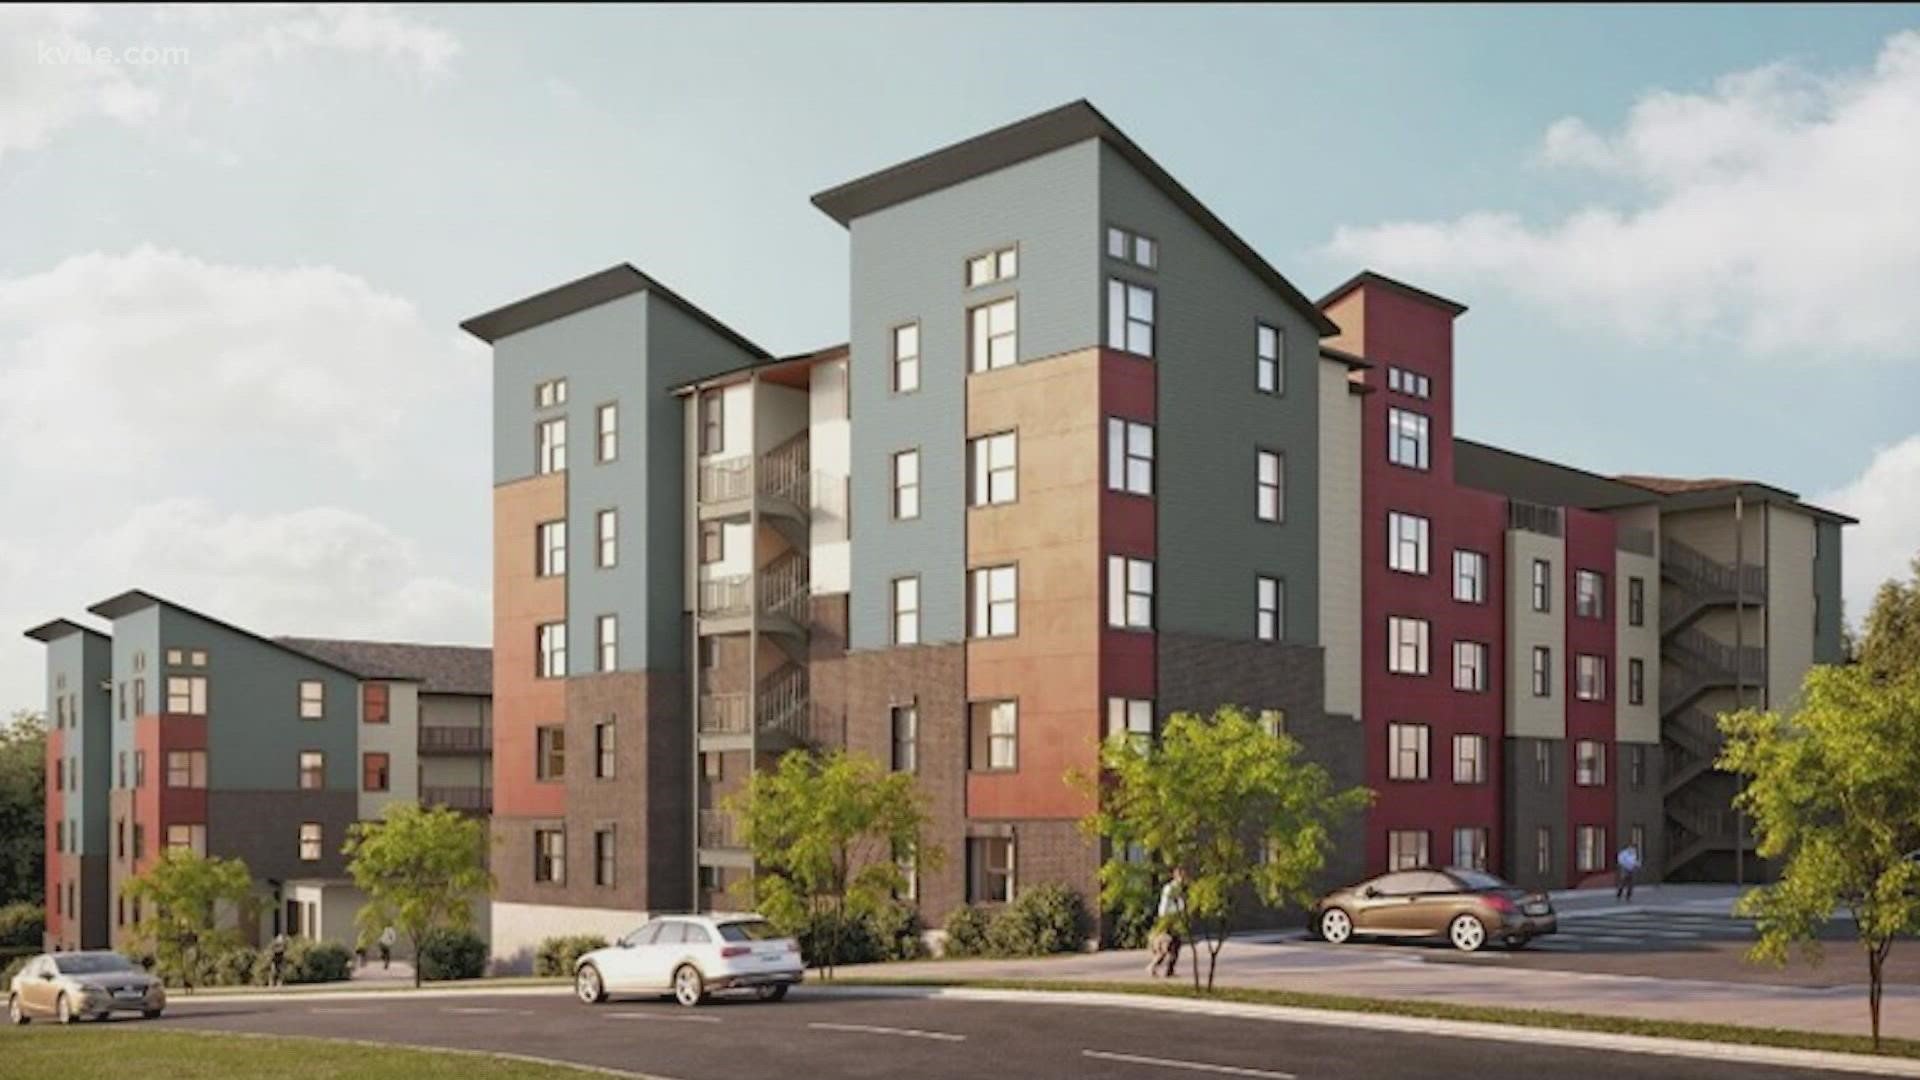 A new multifamily affordable housing complex is opening in Austin on Thursday.